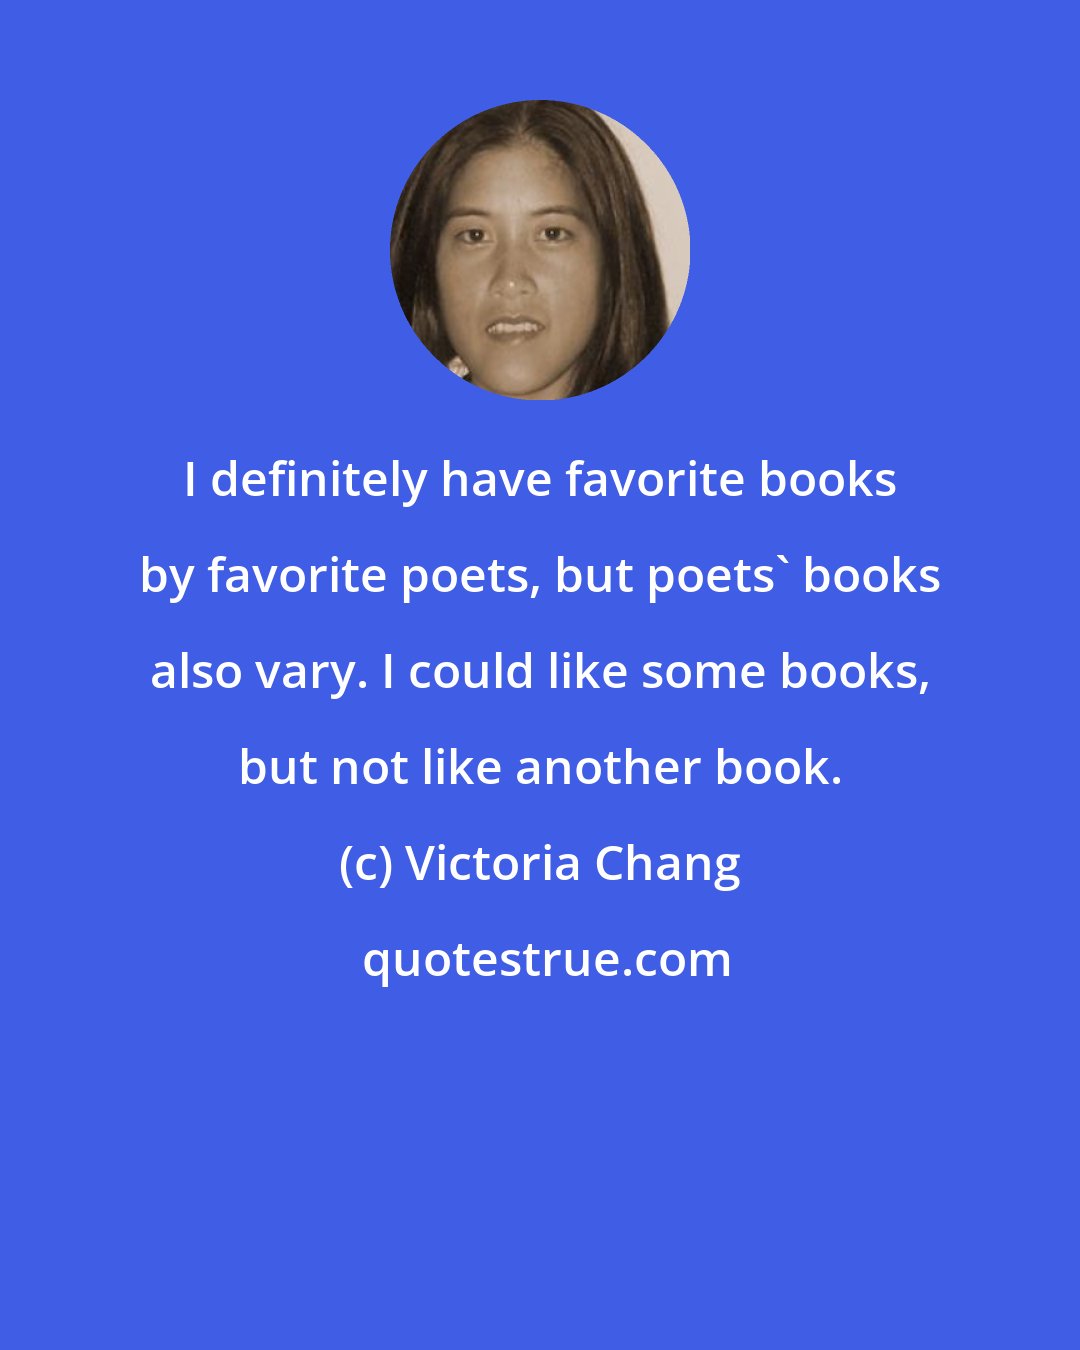 Victoria Chang: I definitely have favorite books by favorite poets, but poets' books also vary. I could like some books, but not like another book.